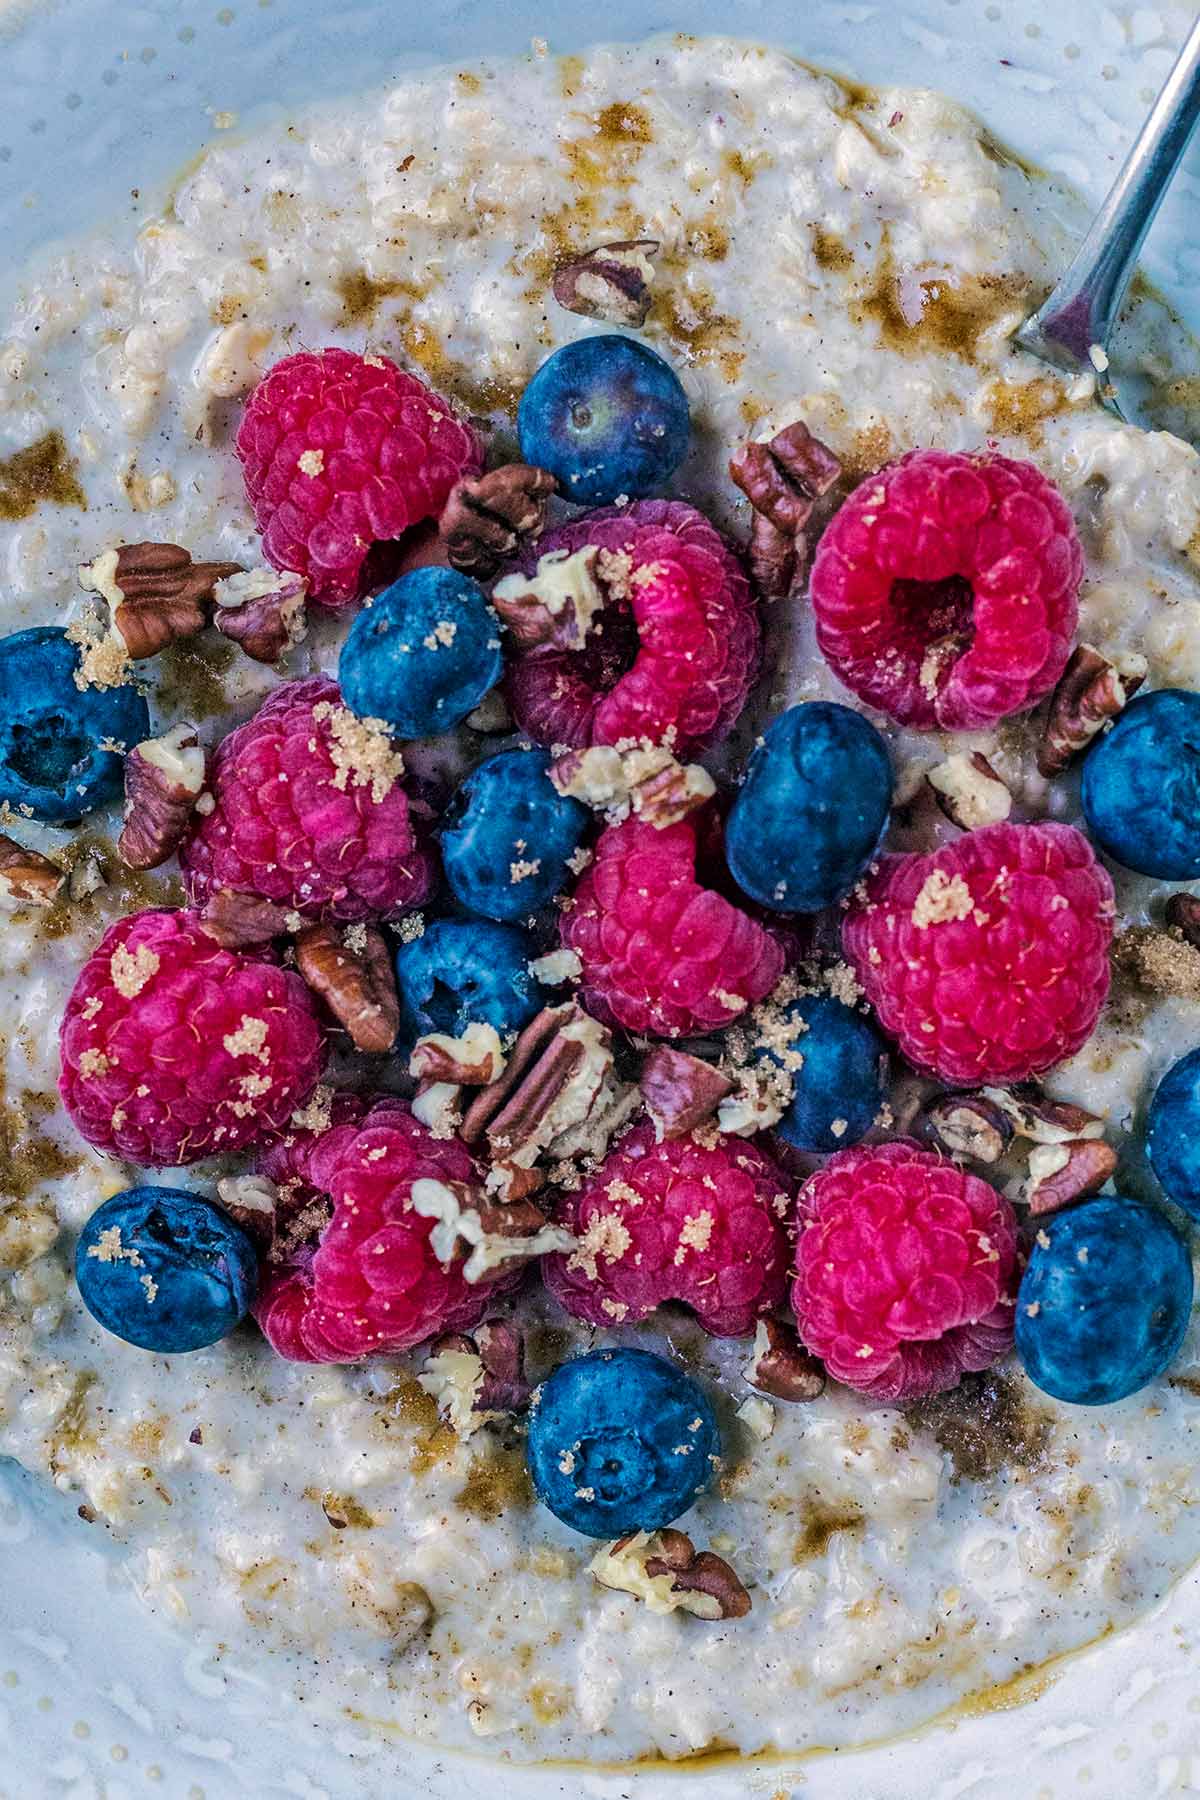 Blueberries, raspberries and crushed pecand on top of some porridge.